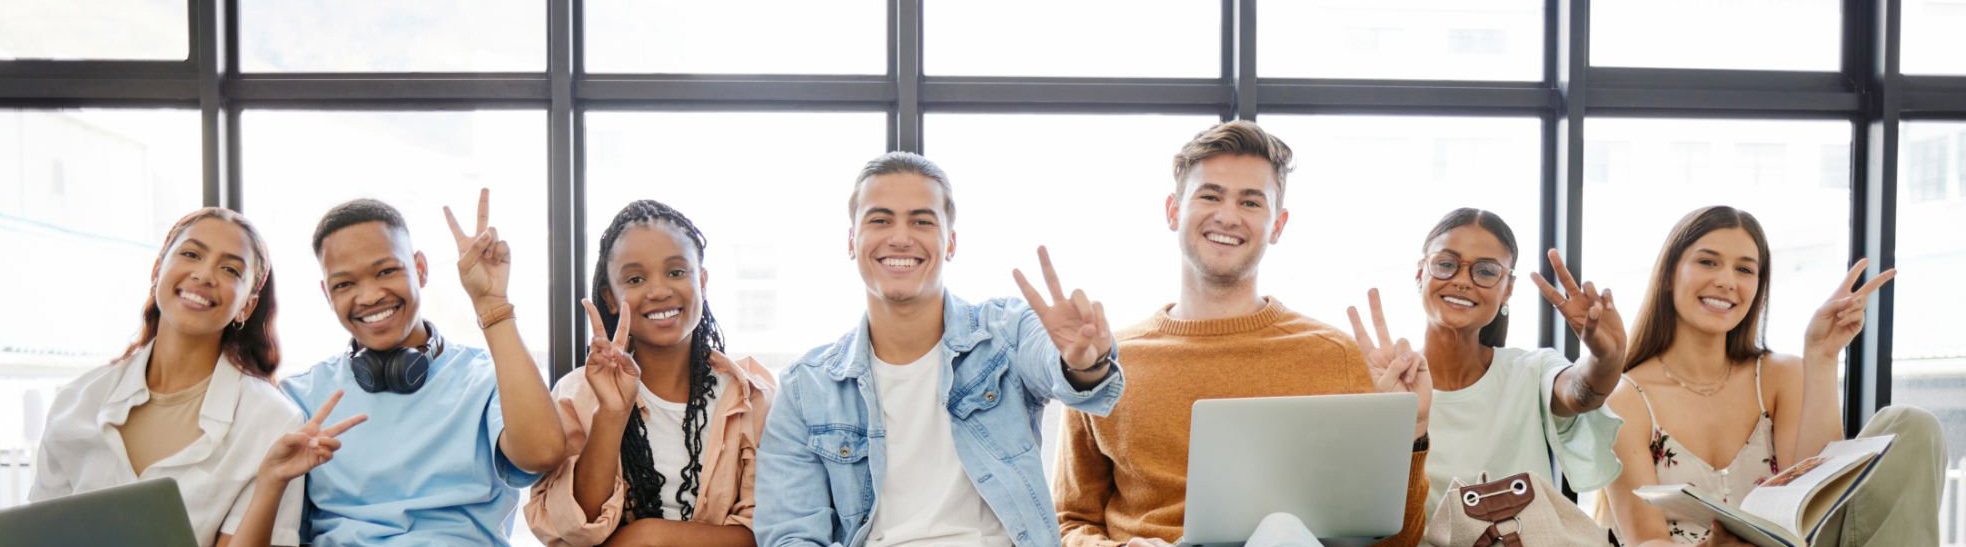 A group of teens/young adults sitting with their backs against a window and laptops on their laps, making the peace sign